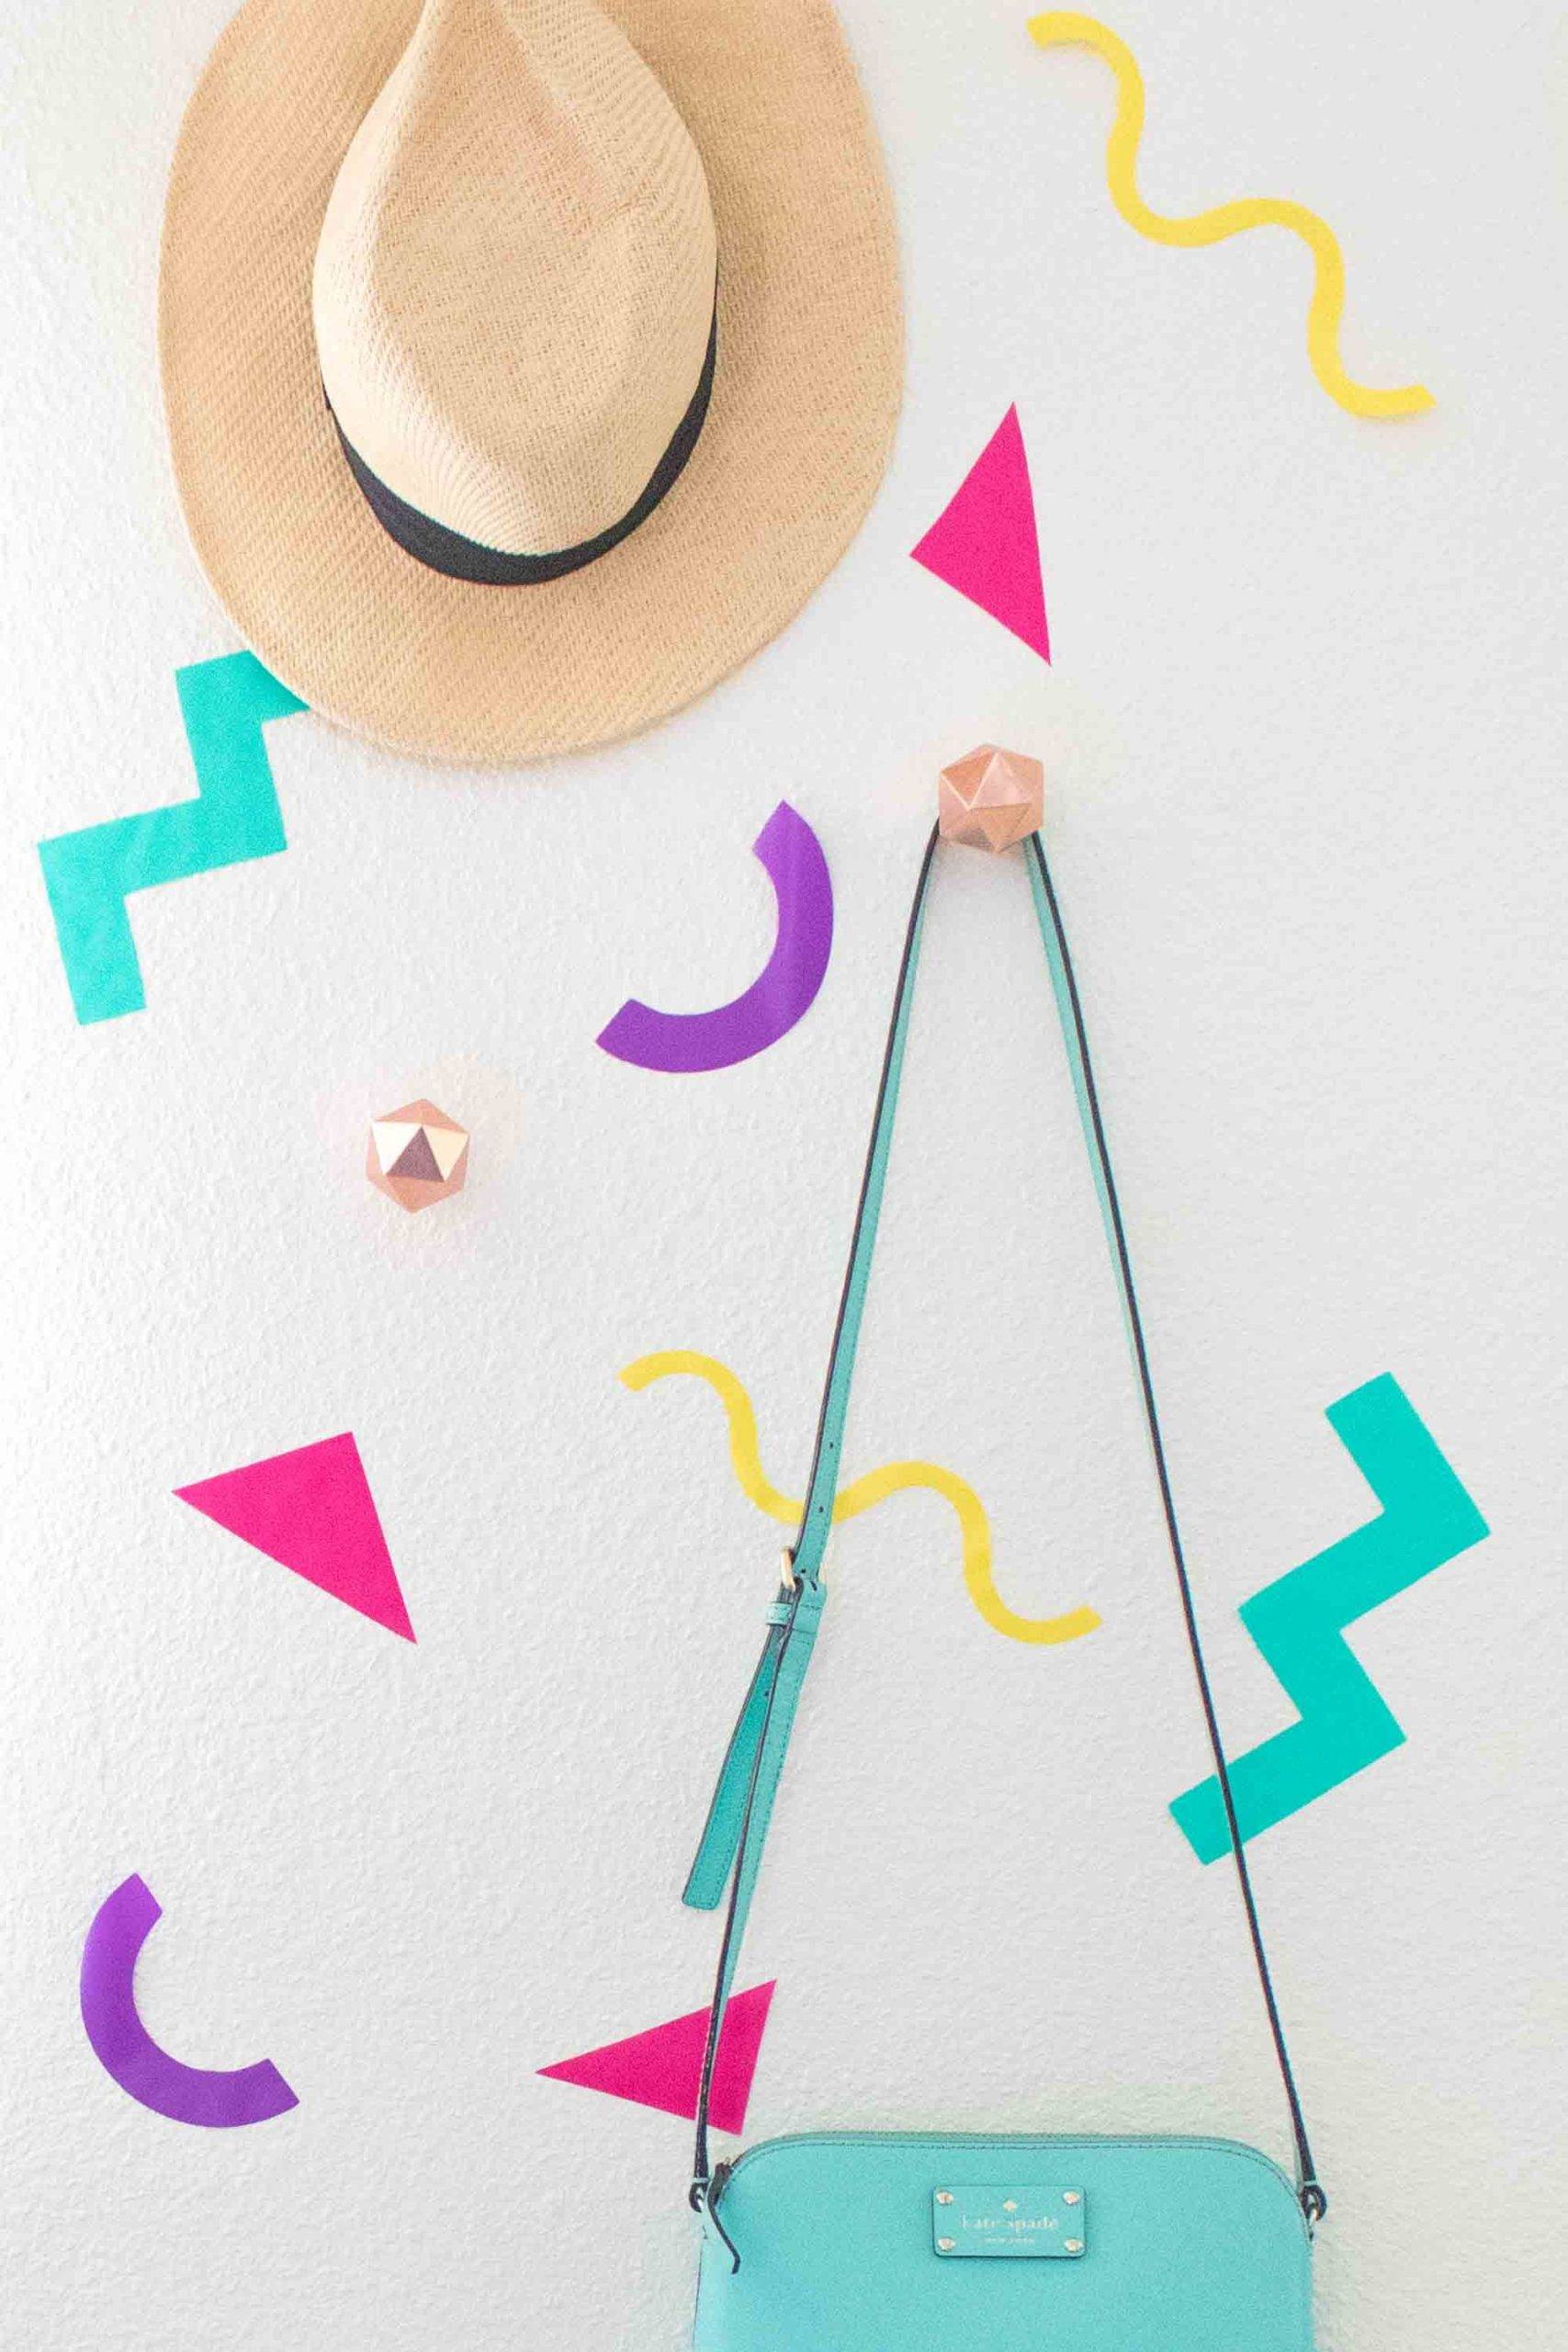 A purse and hat hanging on a white wall with some colorful decorative designs.